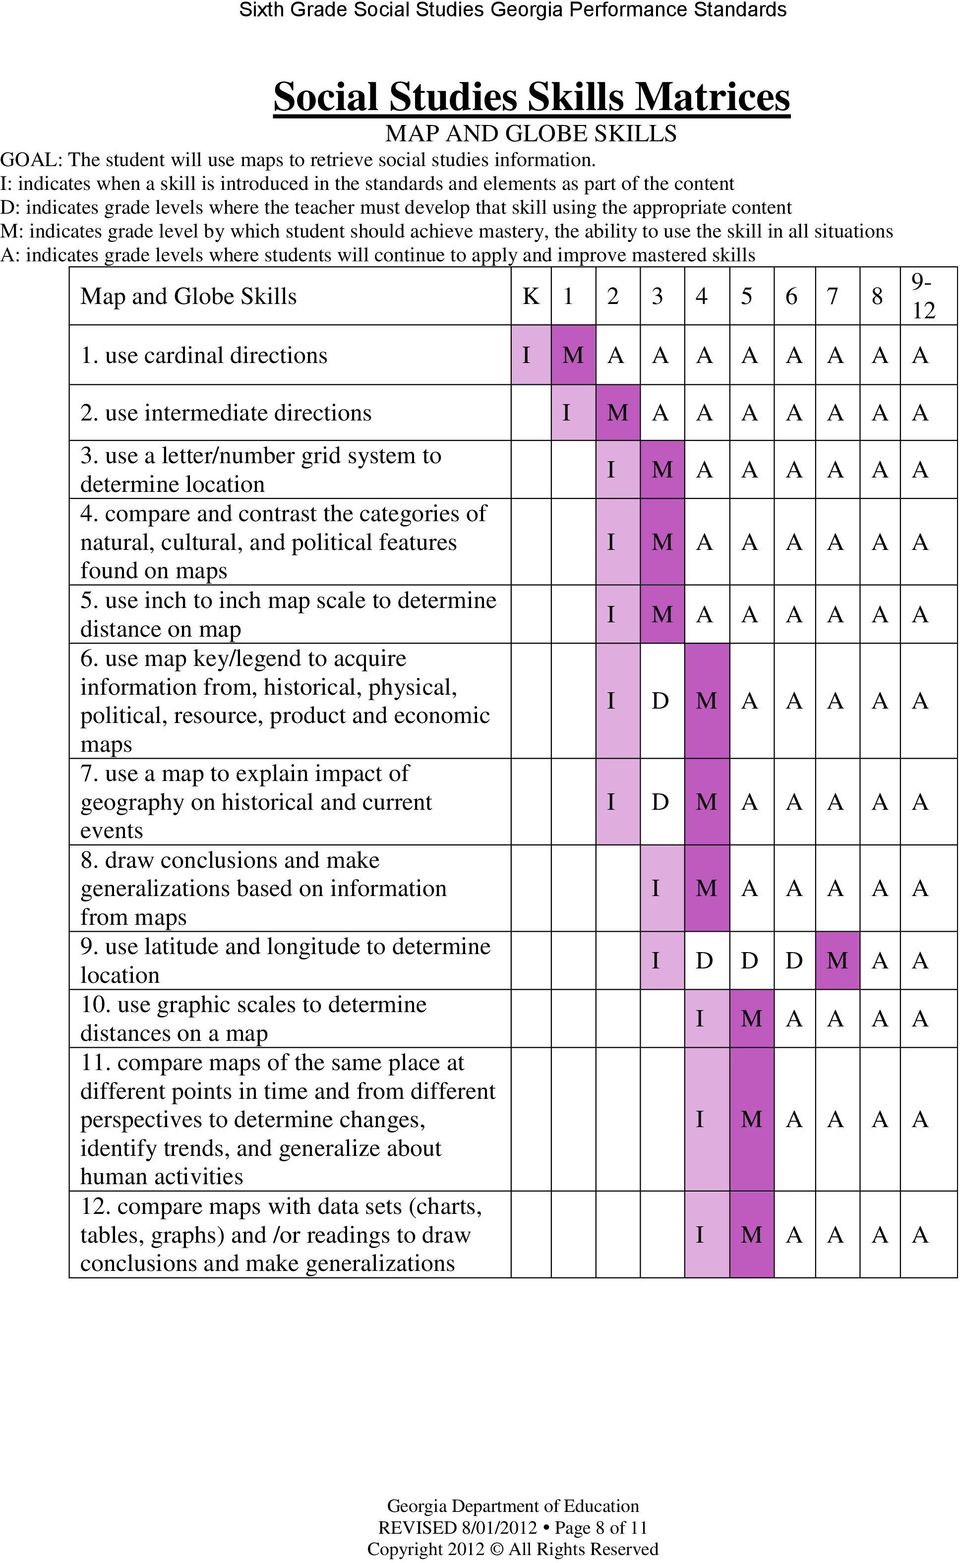 indicates grade level by which student should achieve mastery, the ability to use the skill in all situations A: indicates grade levels where students will continue to apply and improve mastered